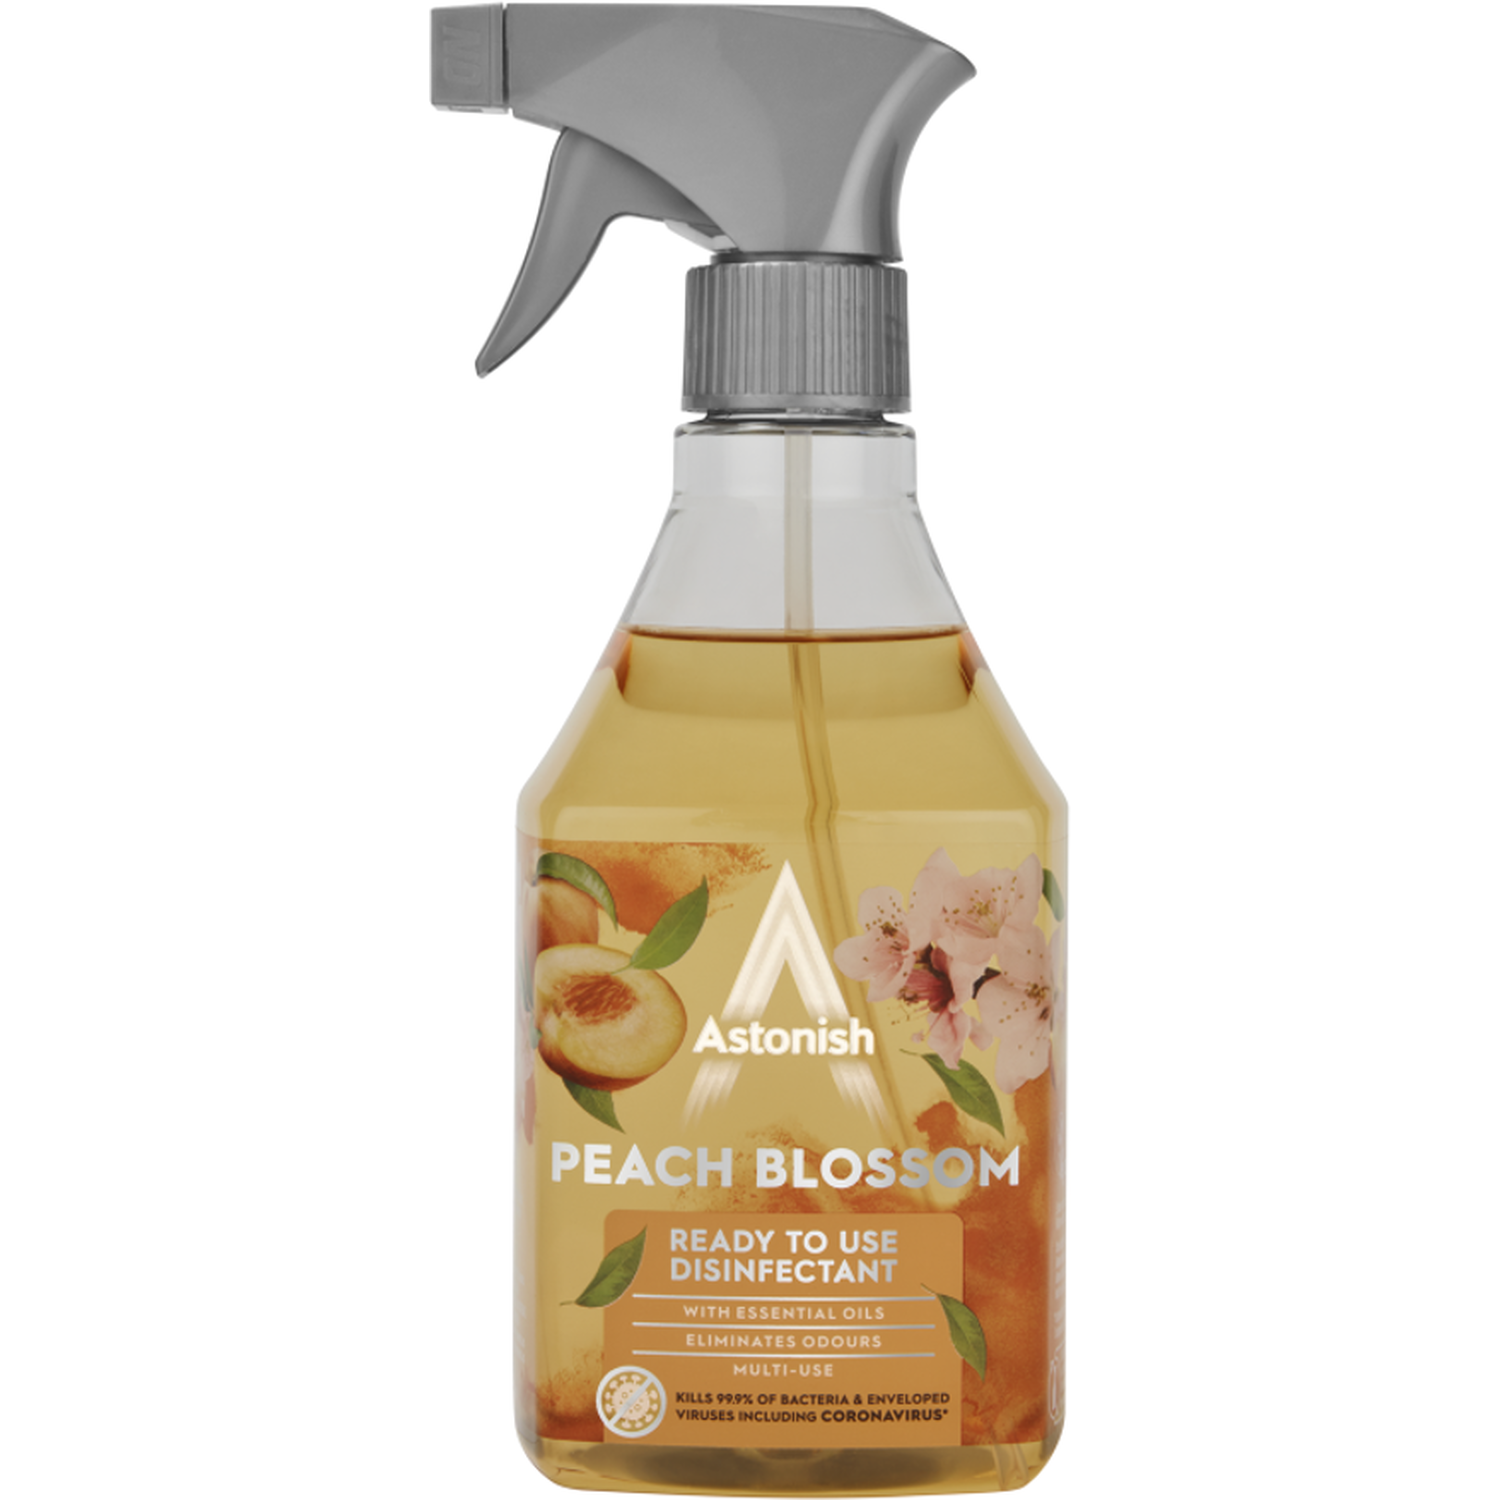 Astonish Ready to Use Disinfectant - Peach Blossom Image